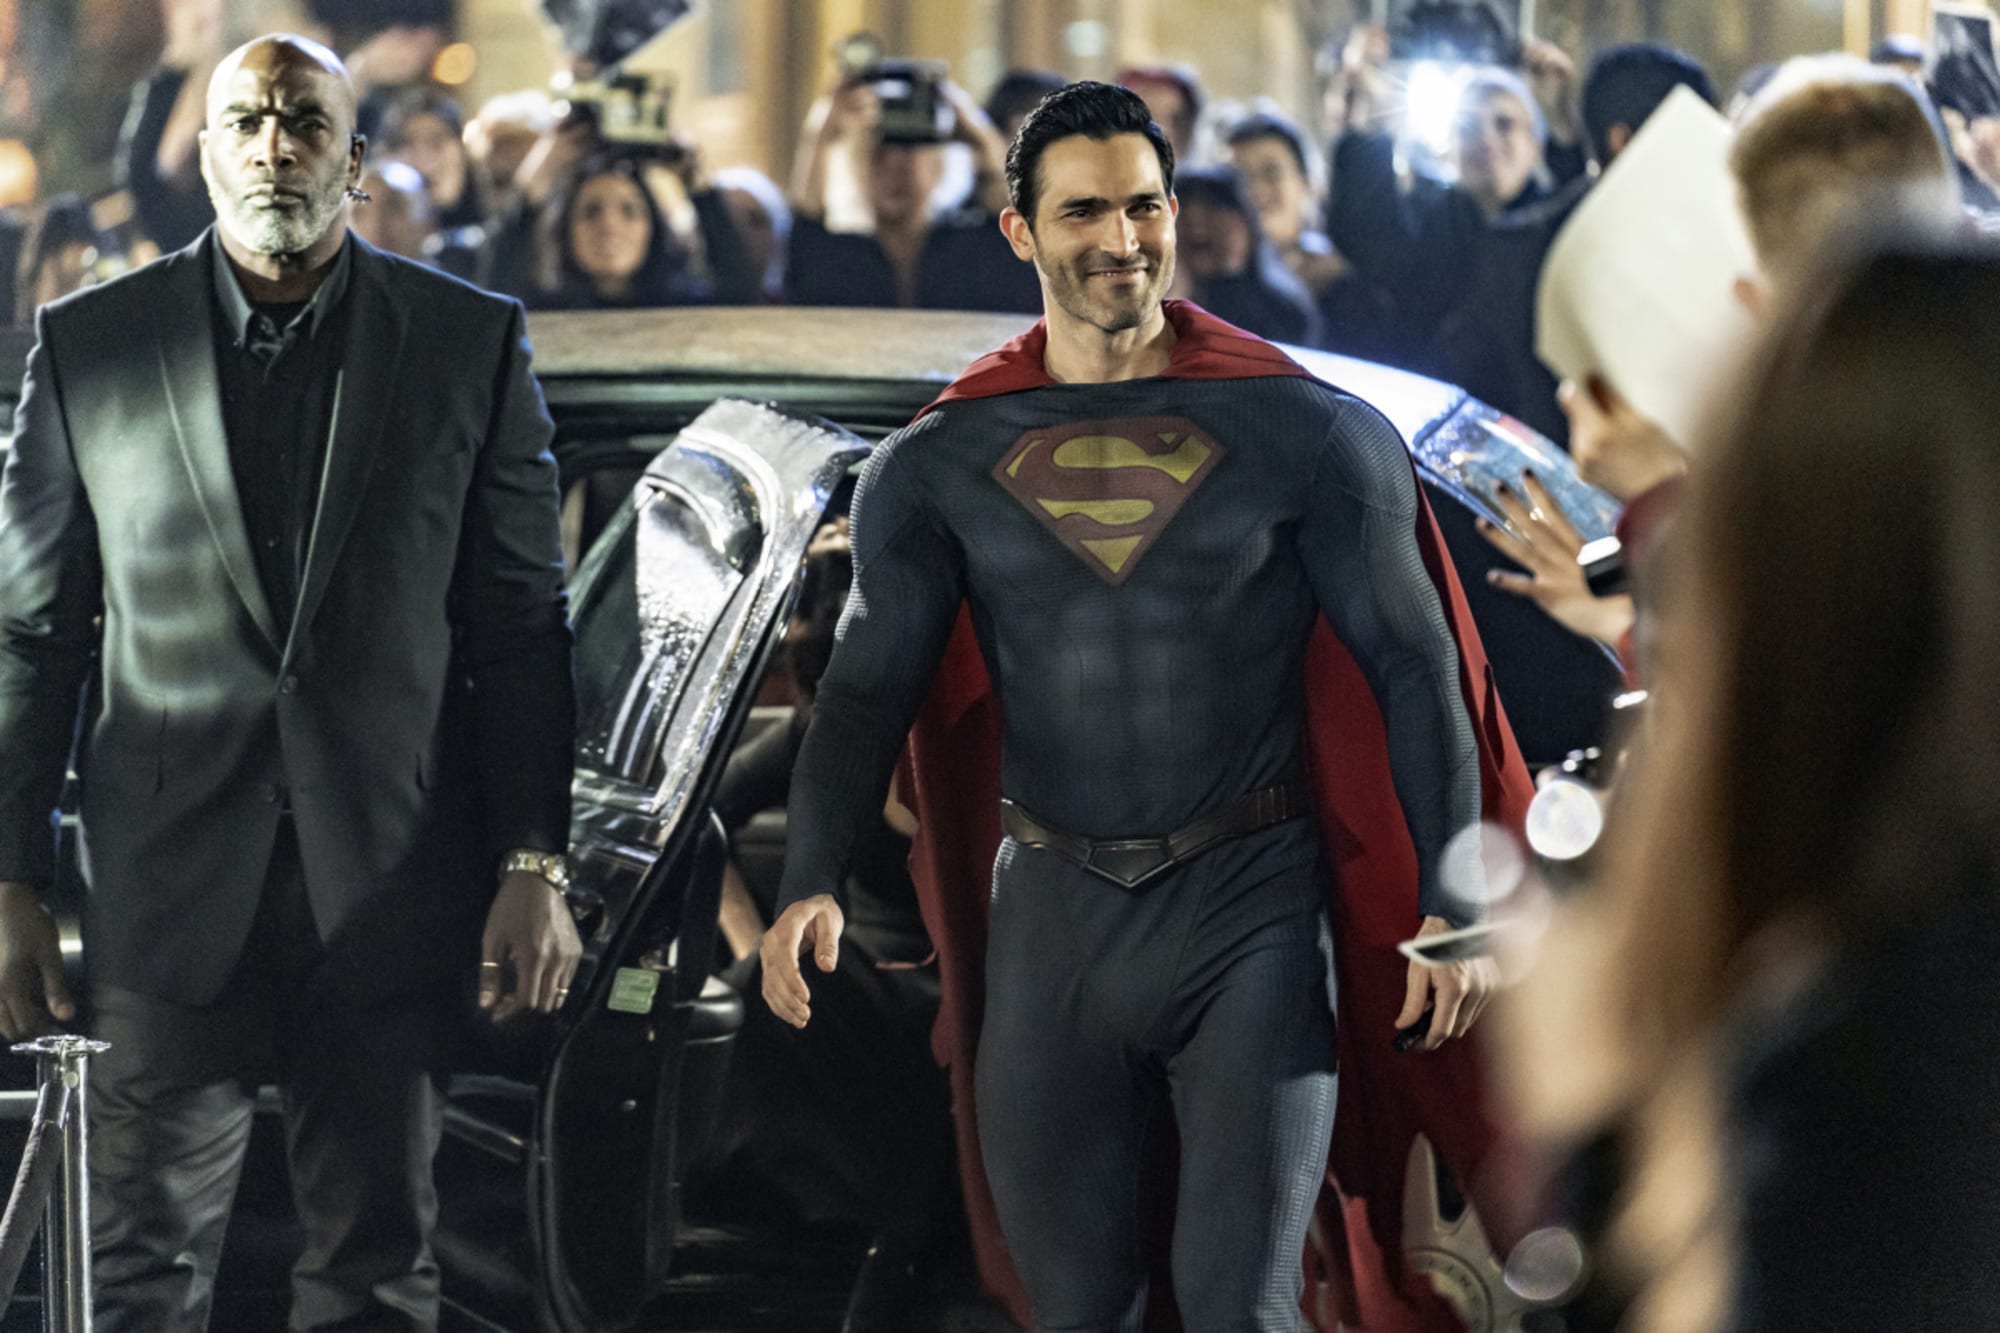 Man of Steel 2' movie news: Superman to face off with Brainiac and Bizarro